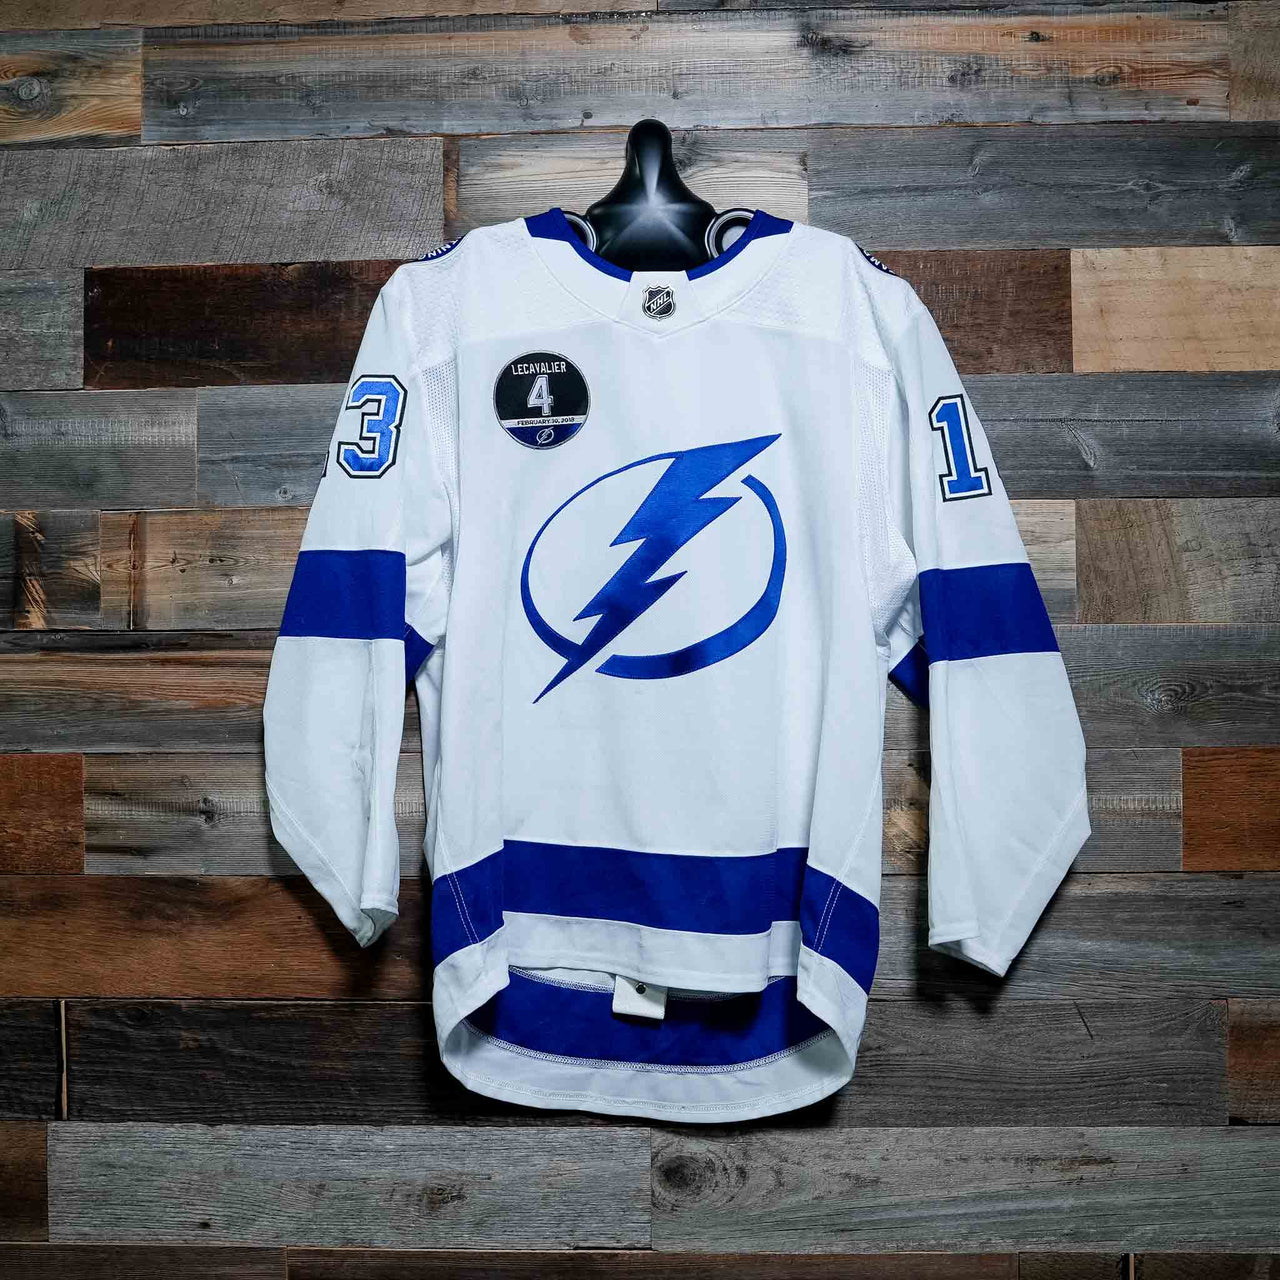 #13 PAQUETTE 2018 Lecavalier Patch Game-Worn Lightning Away Jersey (Size 56)